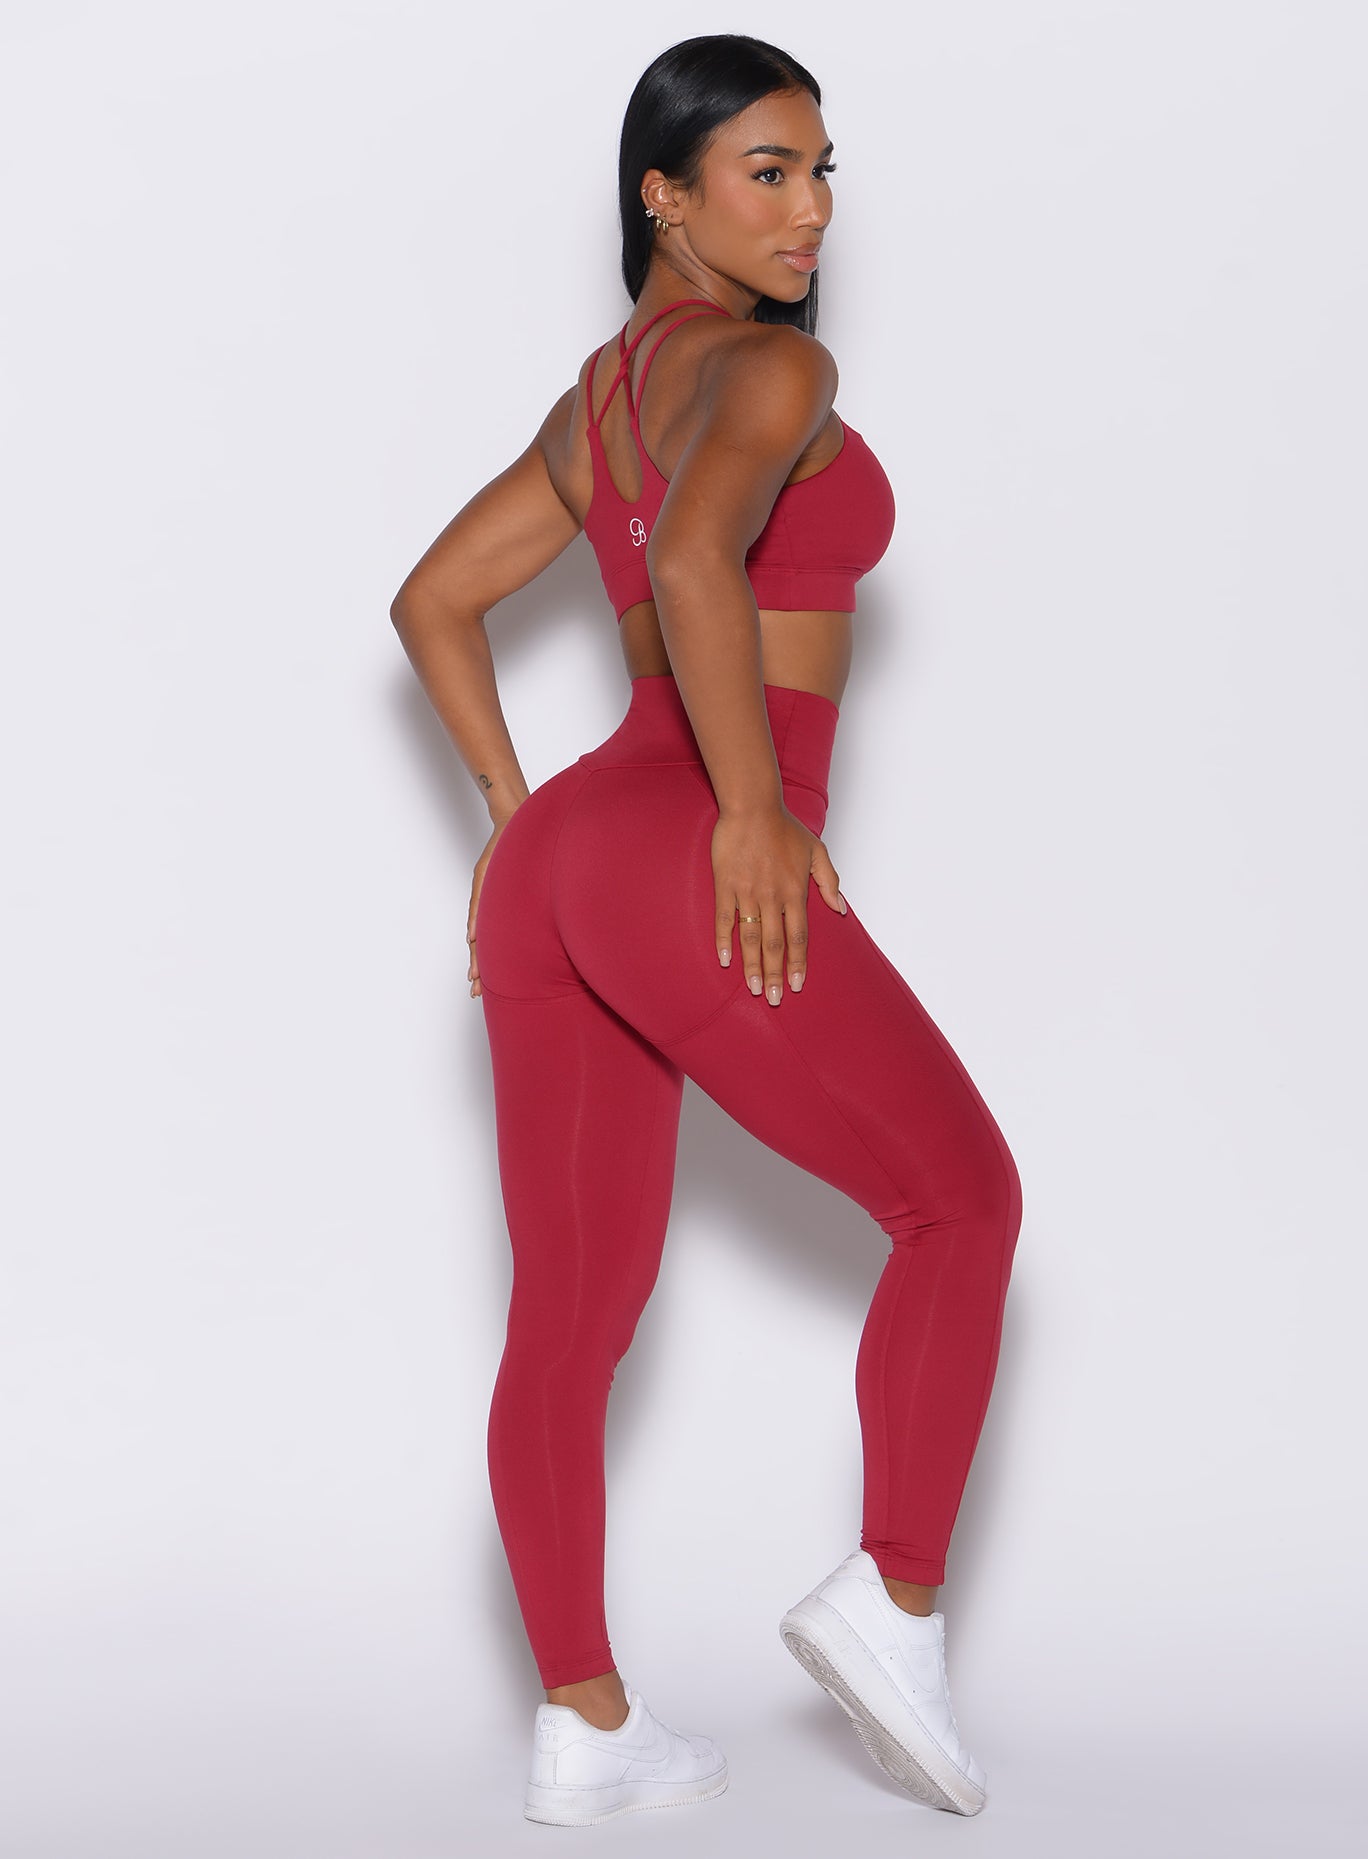 Right side profile view of a model facing to her right wearing our shape leggings in maroon color along with the matching bra